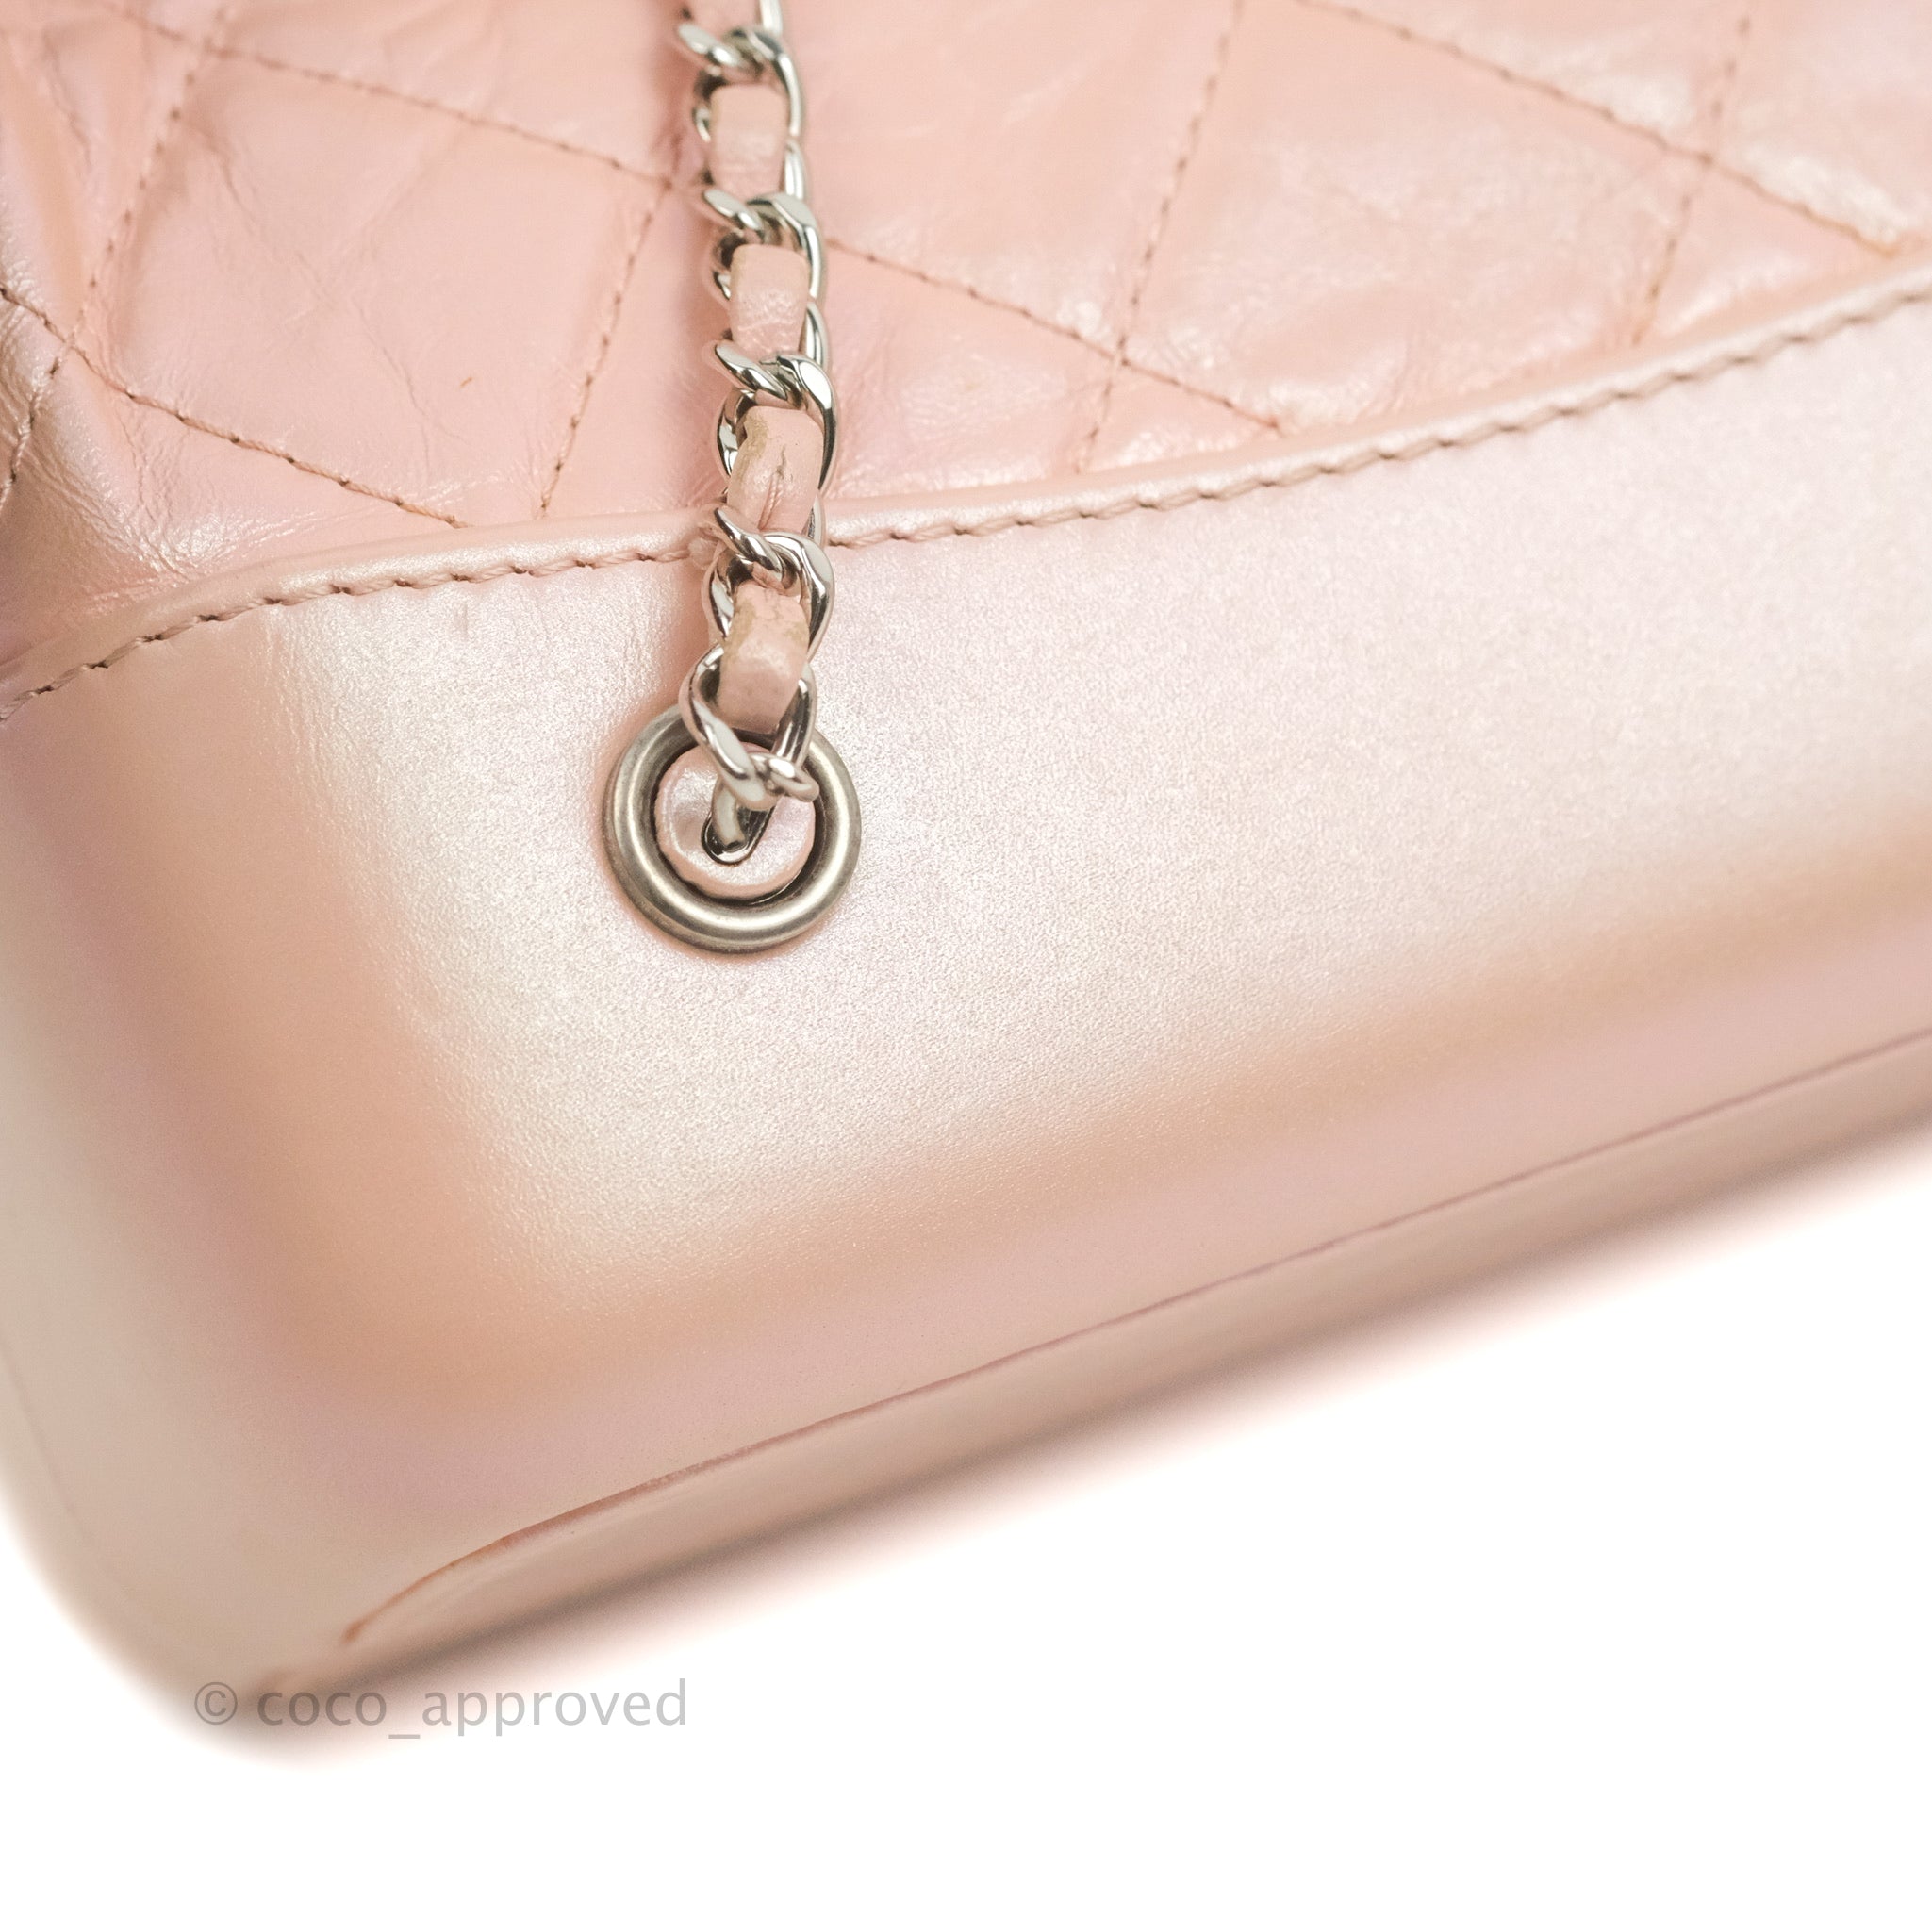 Chanel Quilted Iridescent Aged Calfskin Hobo